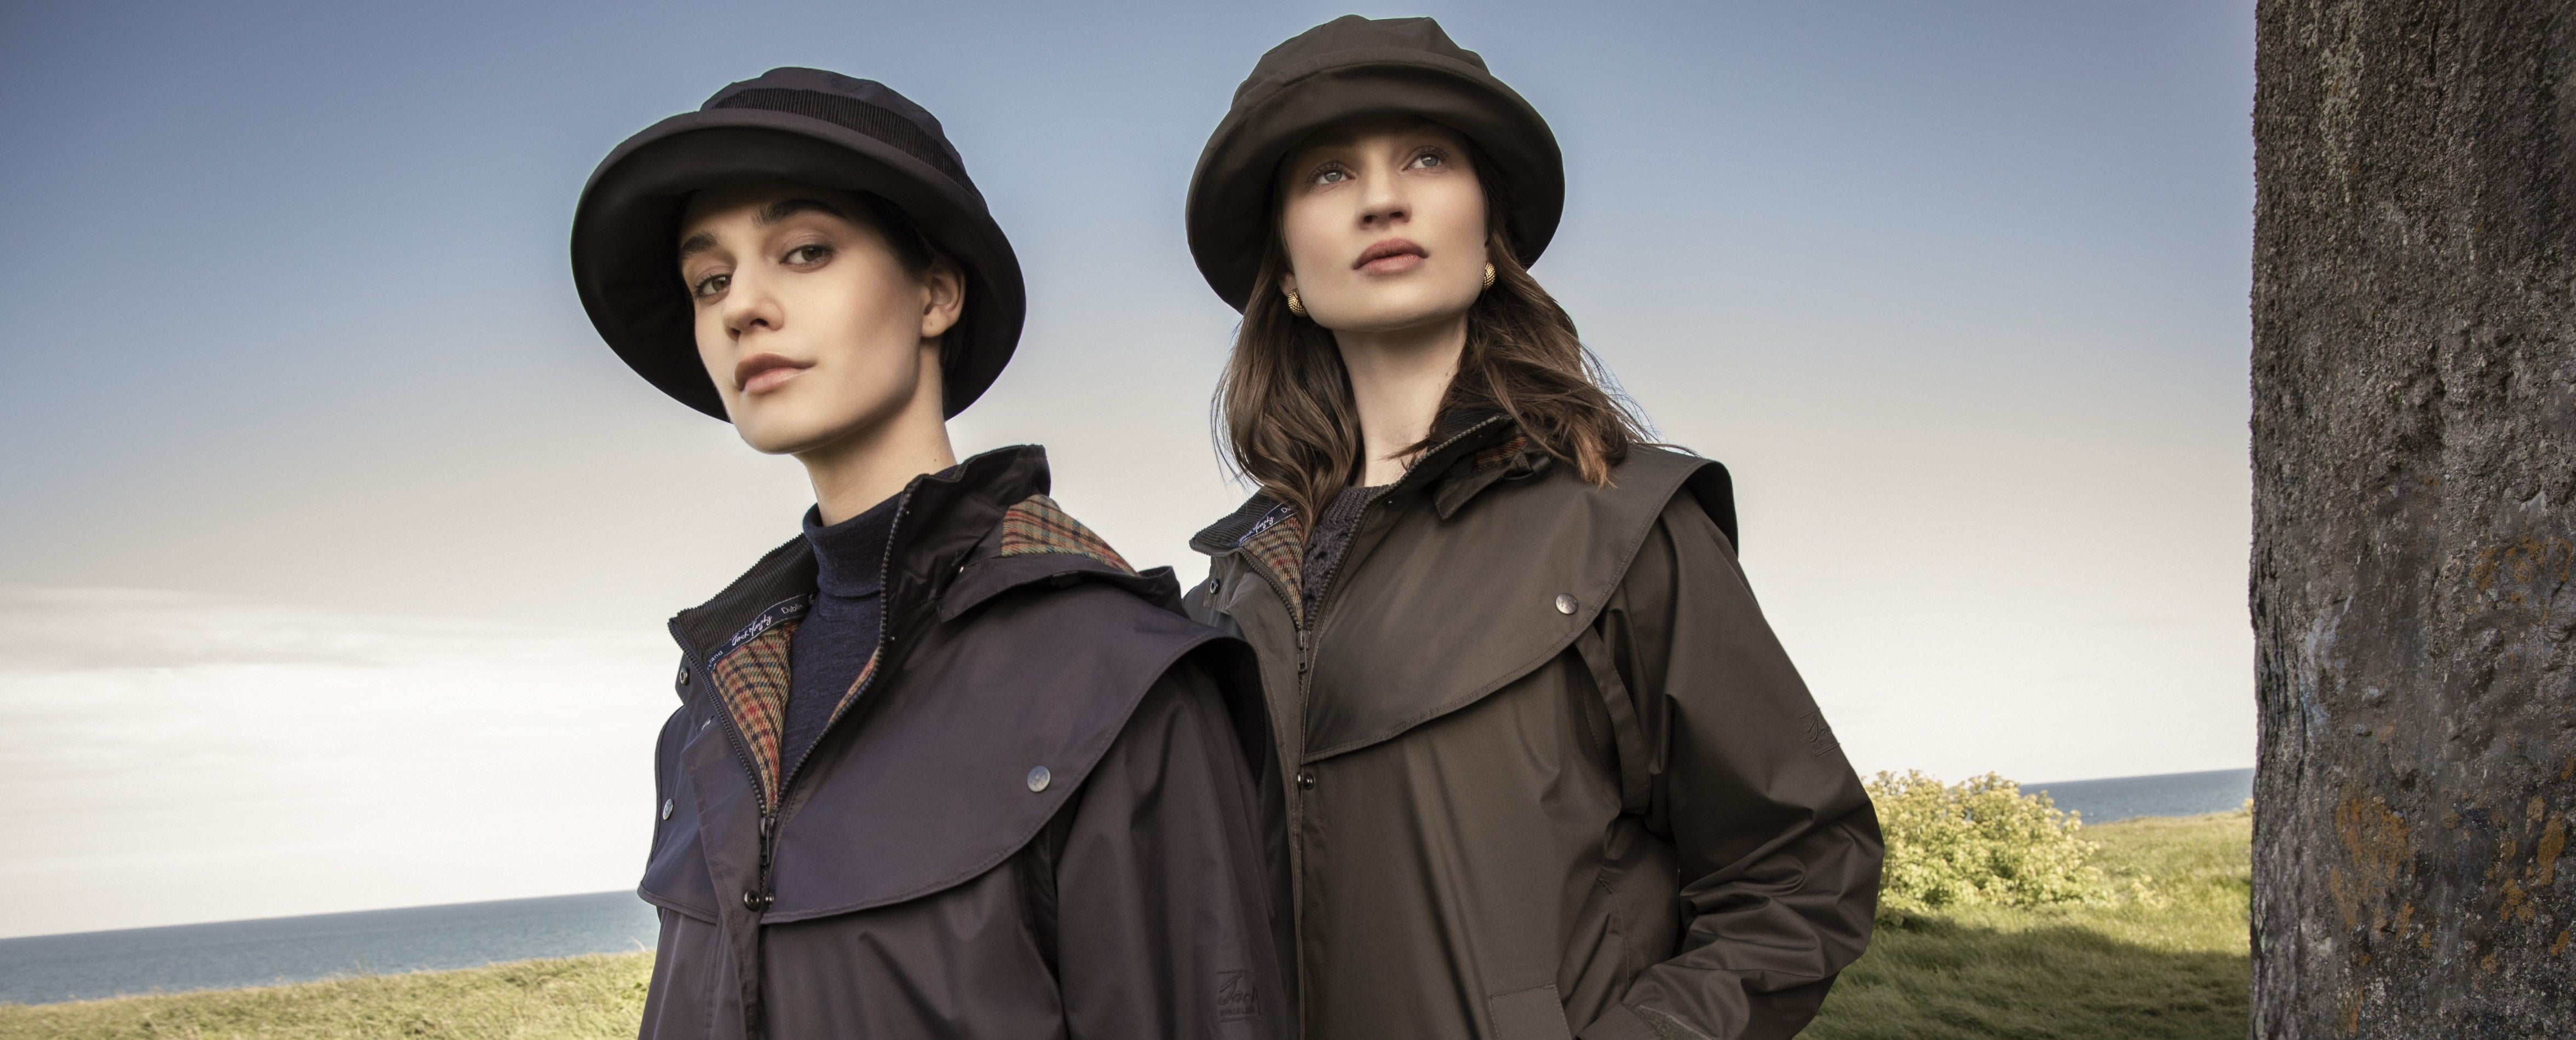 Cotswold and Malvern waterproof jackets in olive and Navy with Malvern Hats